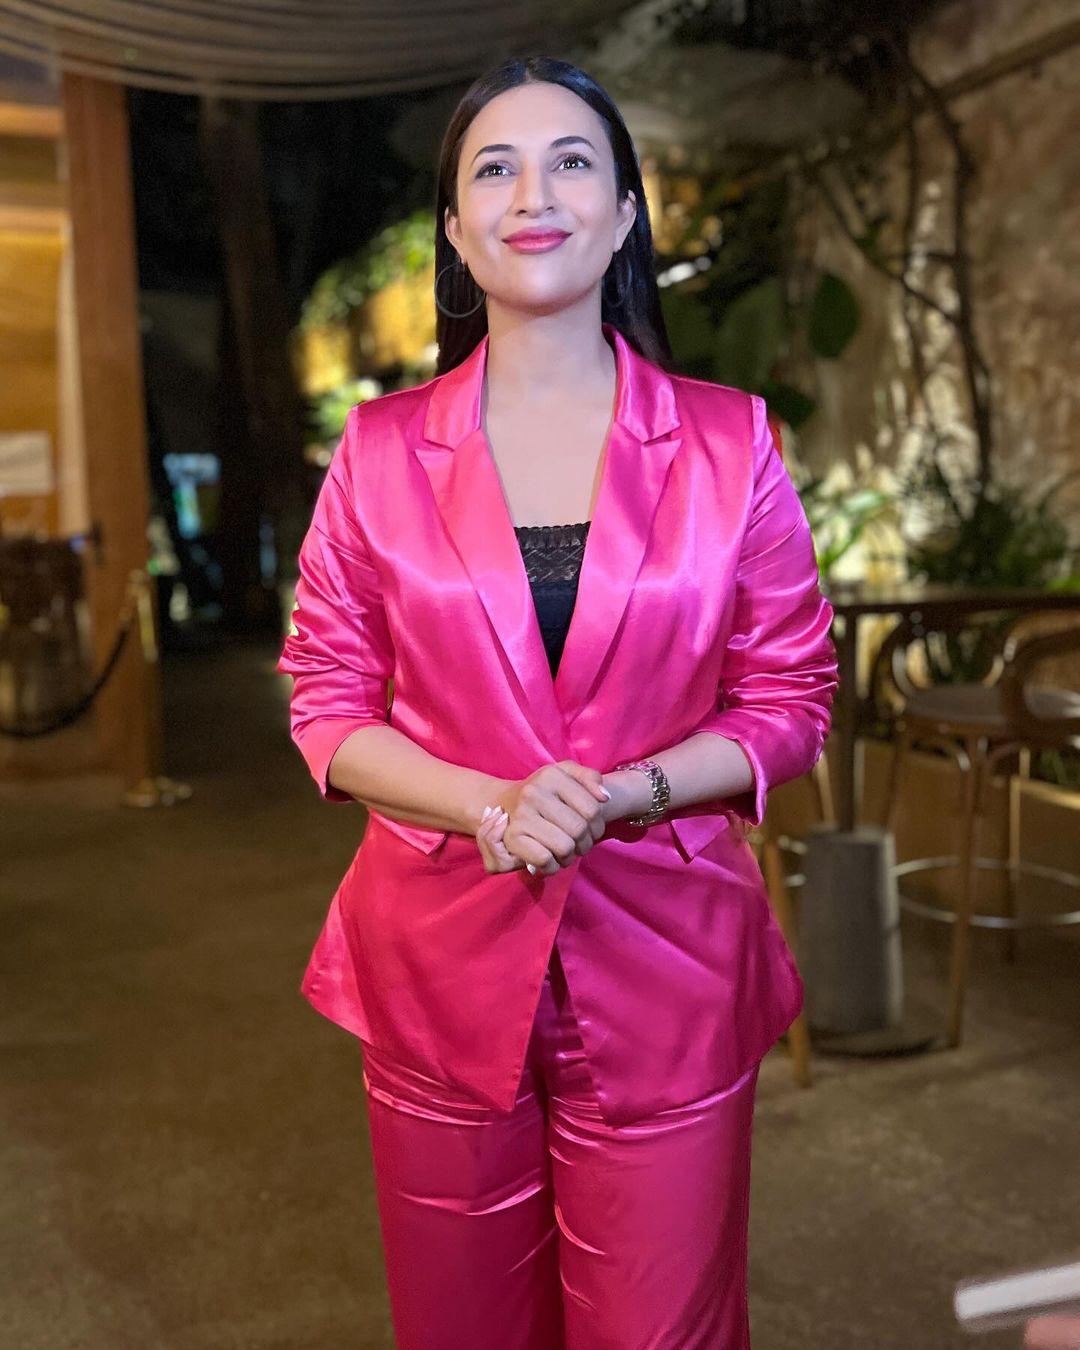 Divyanka Tripathi looked stunning in a pink formal suit, and we can't get over our Indian Barbie